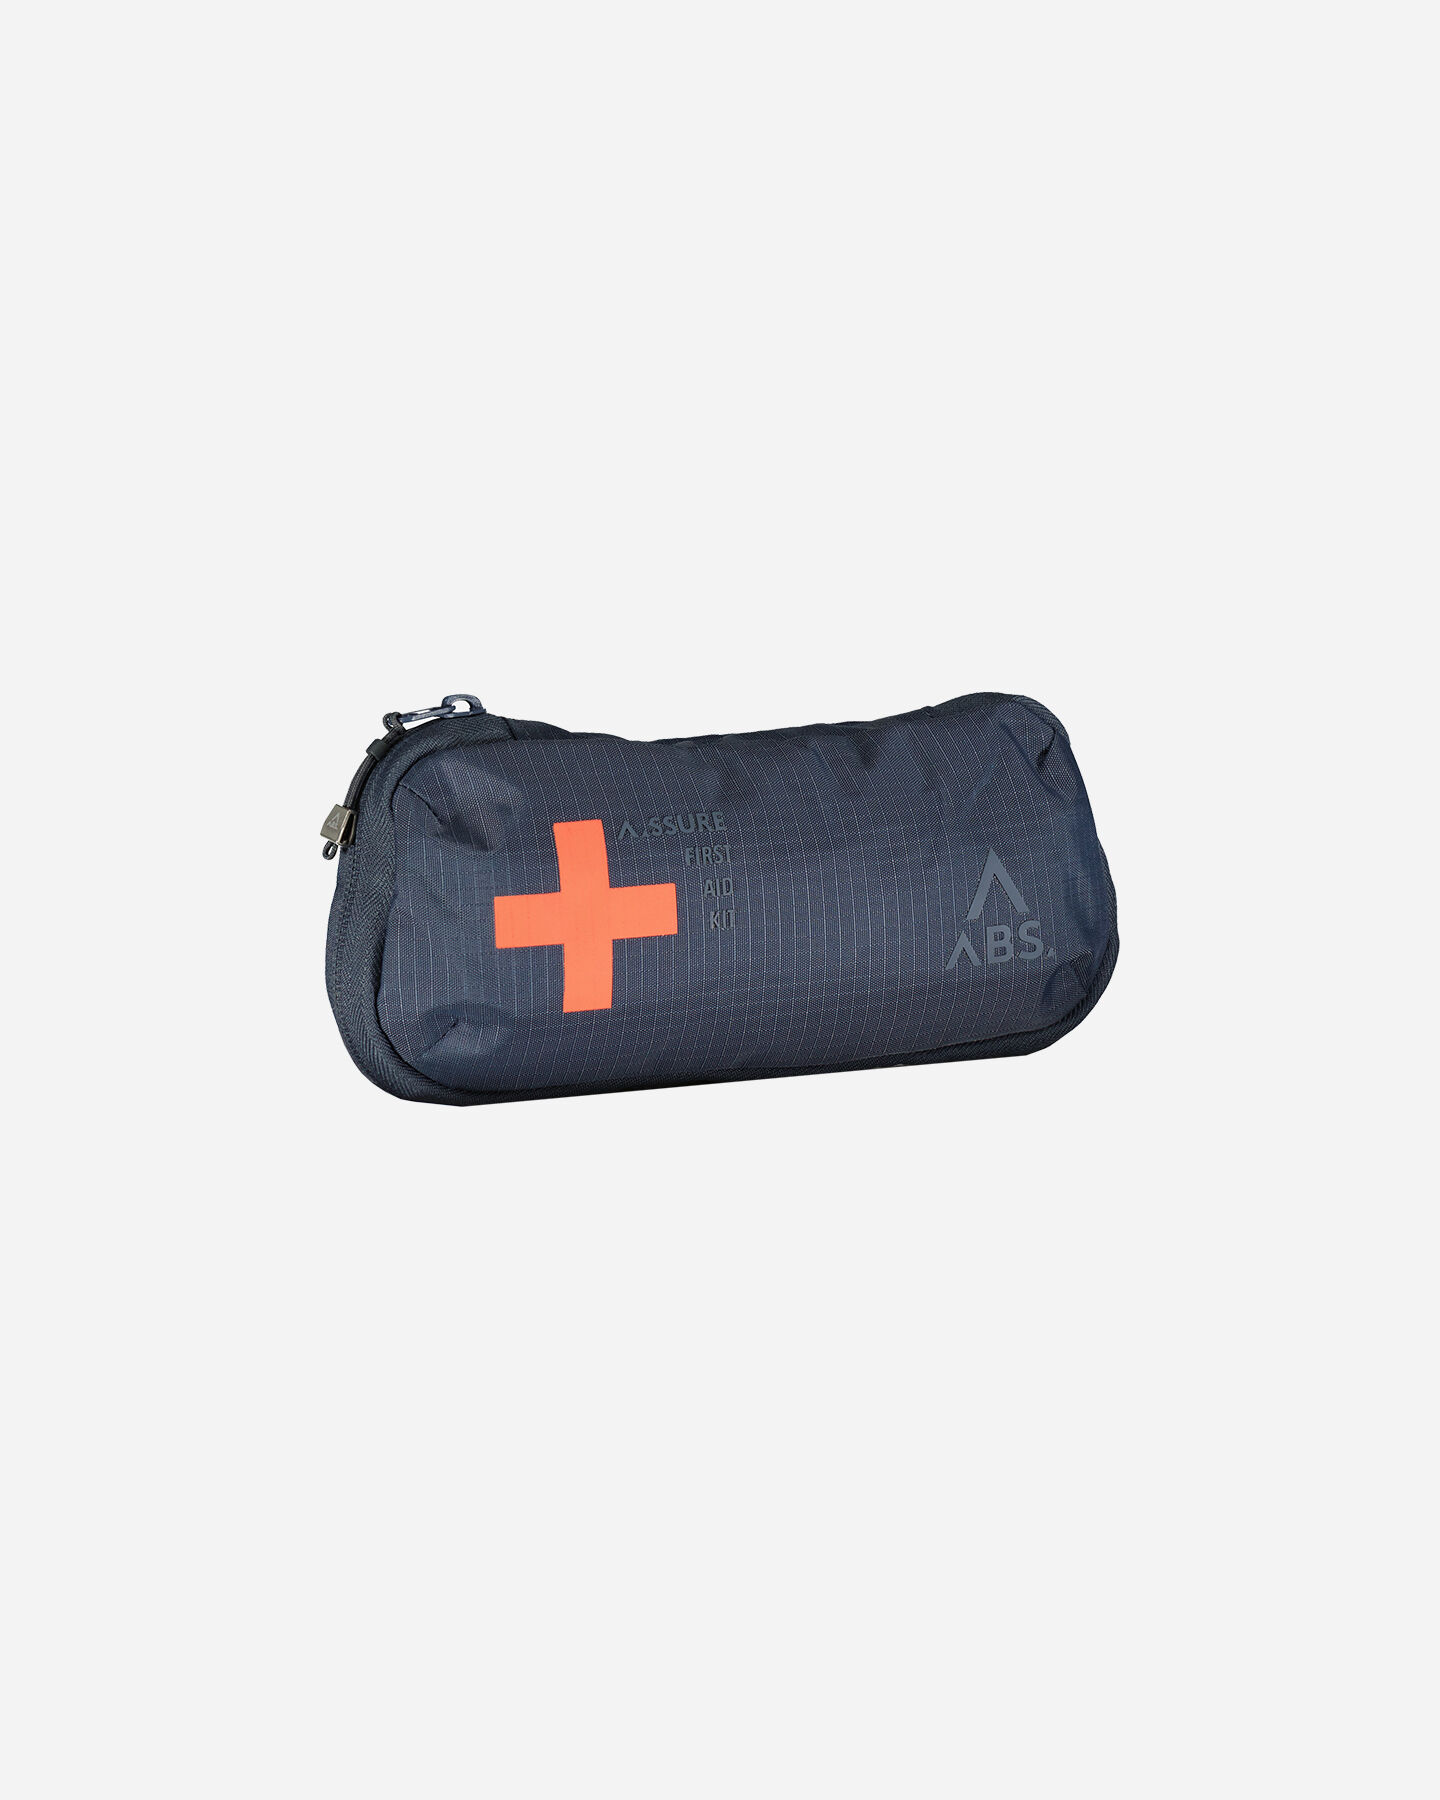  Safety alpinismo ABS FIRST AID  S4108275|MIX|UNI scatto 0